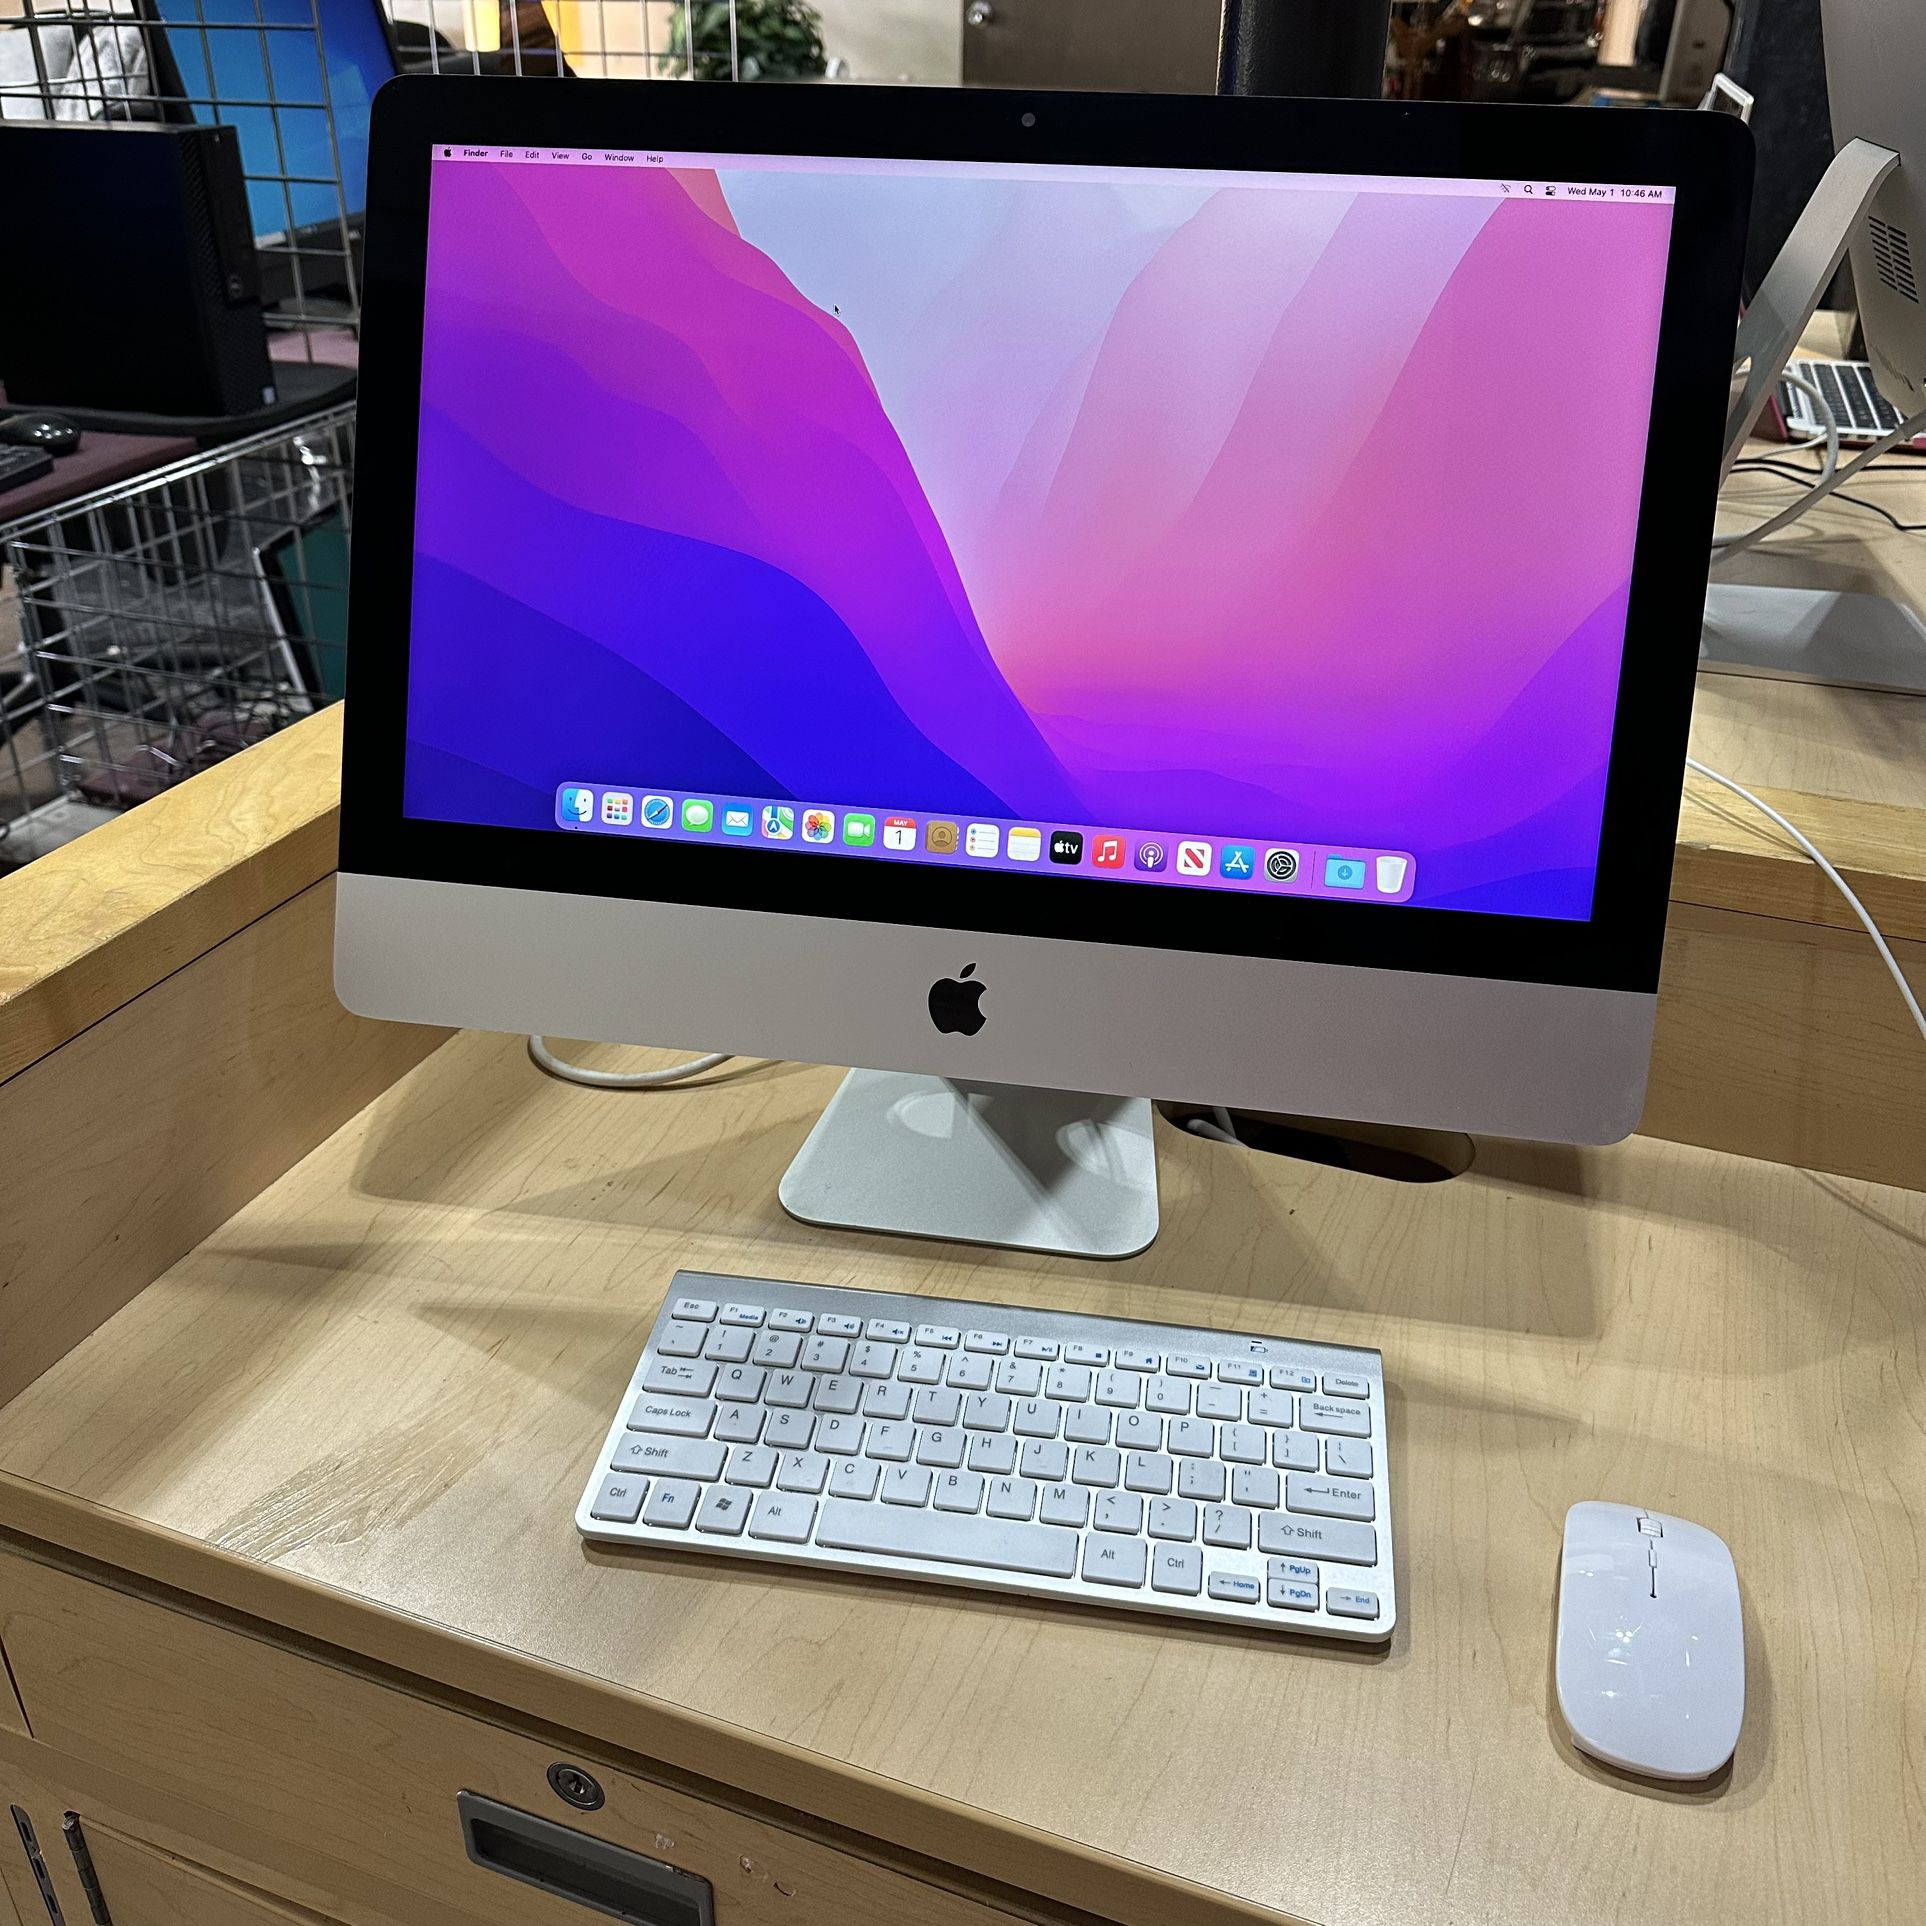 2017 iMac With 21.5 Inch Display